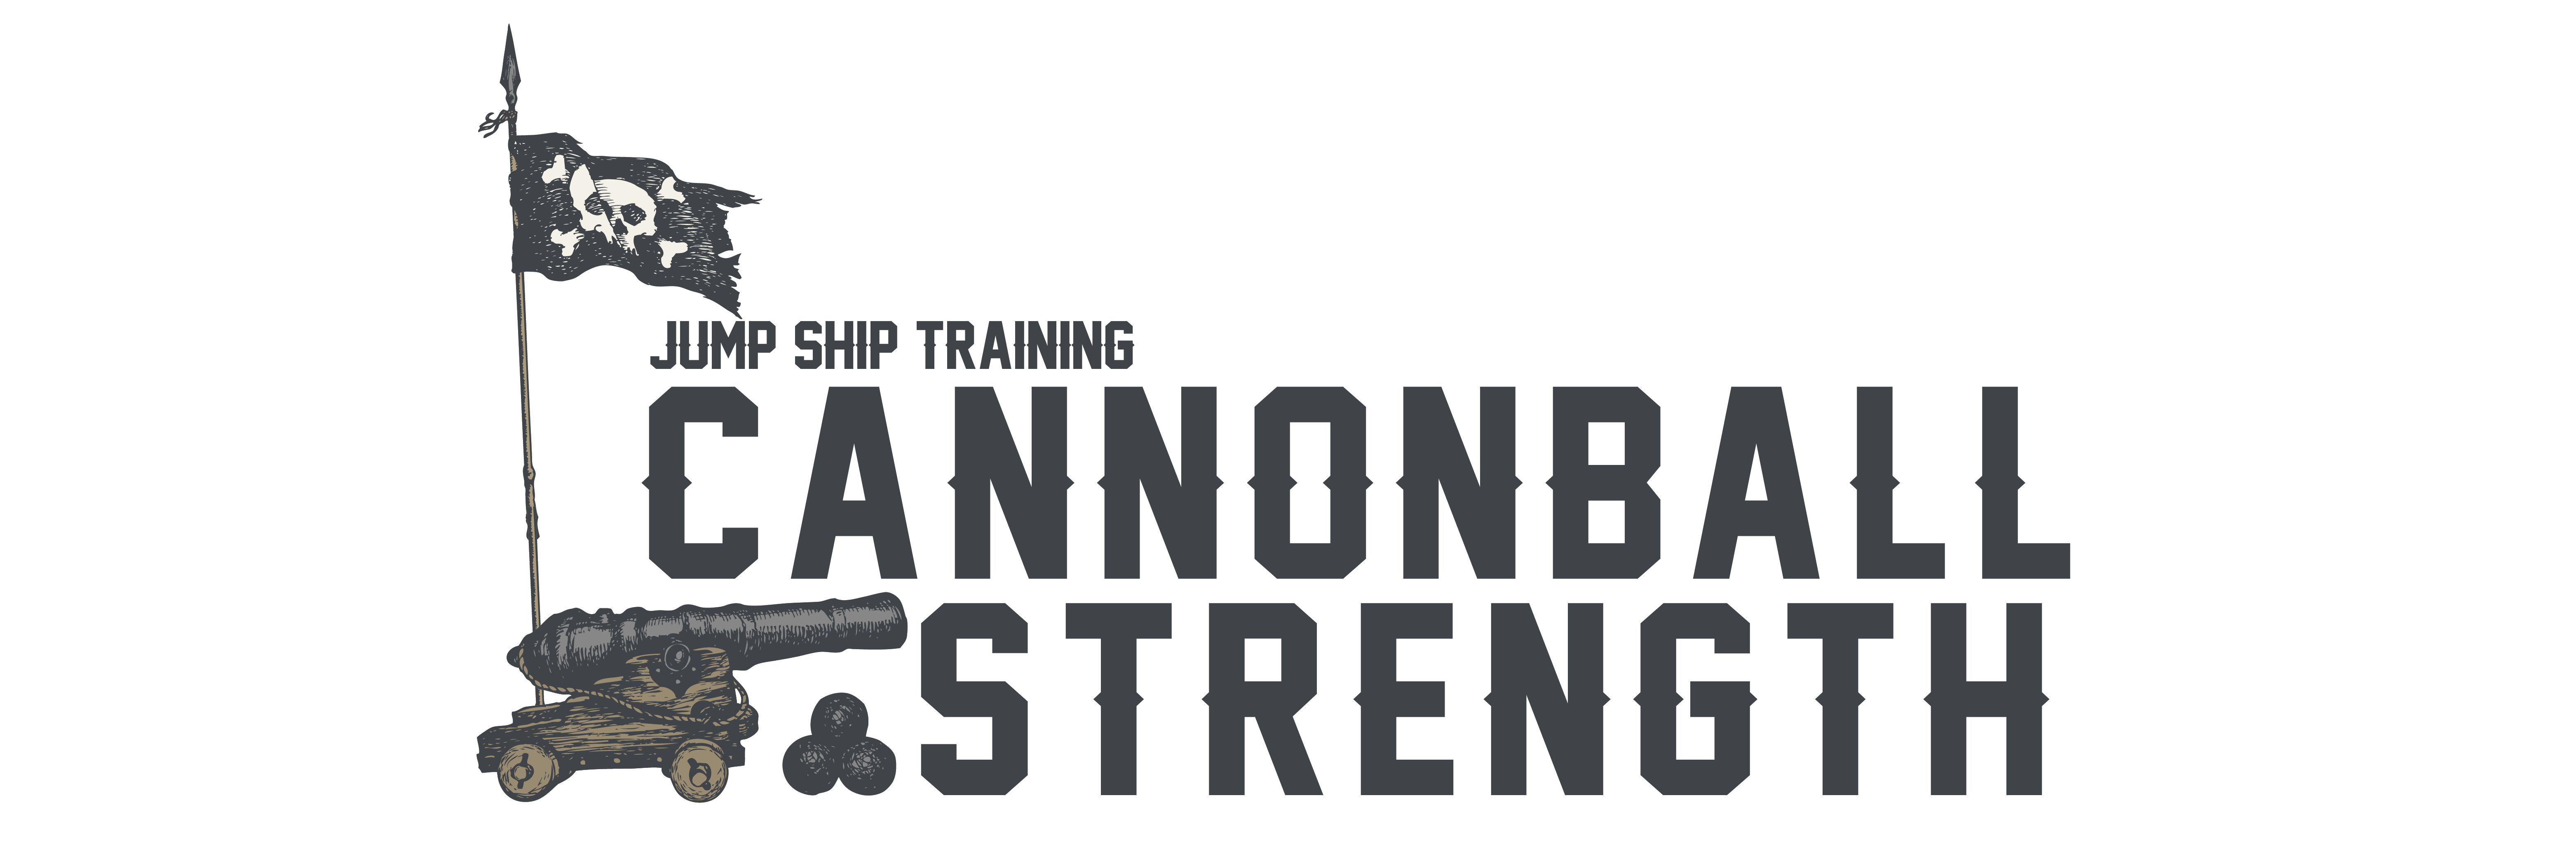 Cannonball Strength - Super Total